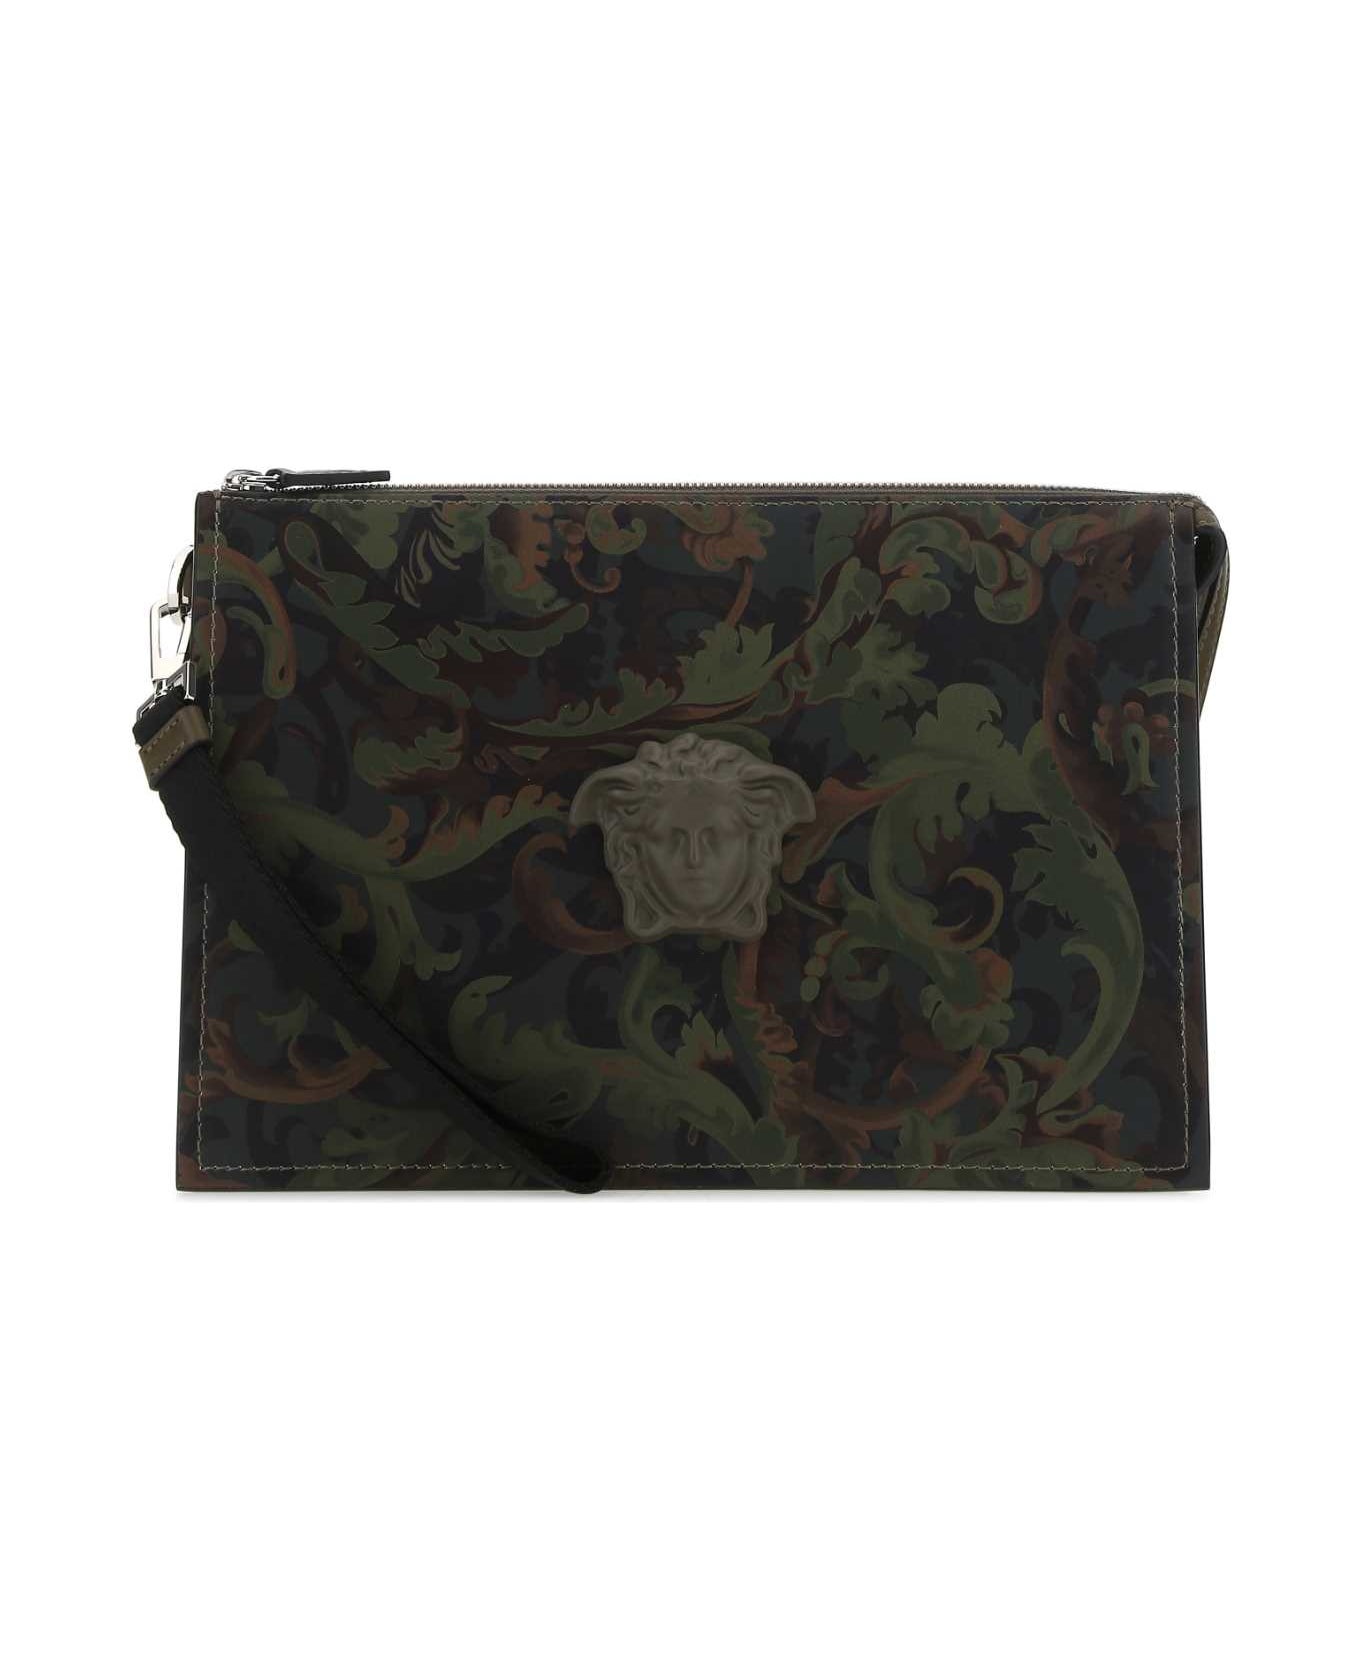 Versace Printed Leather Clutch - 5K00P バッグ